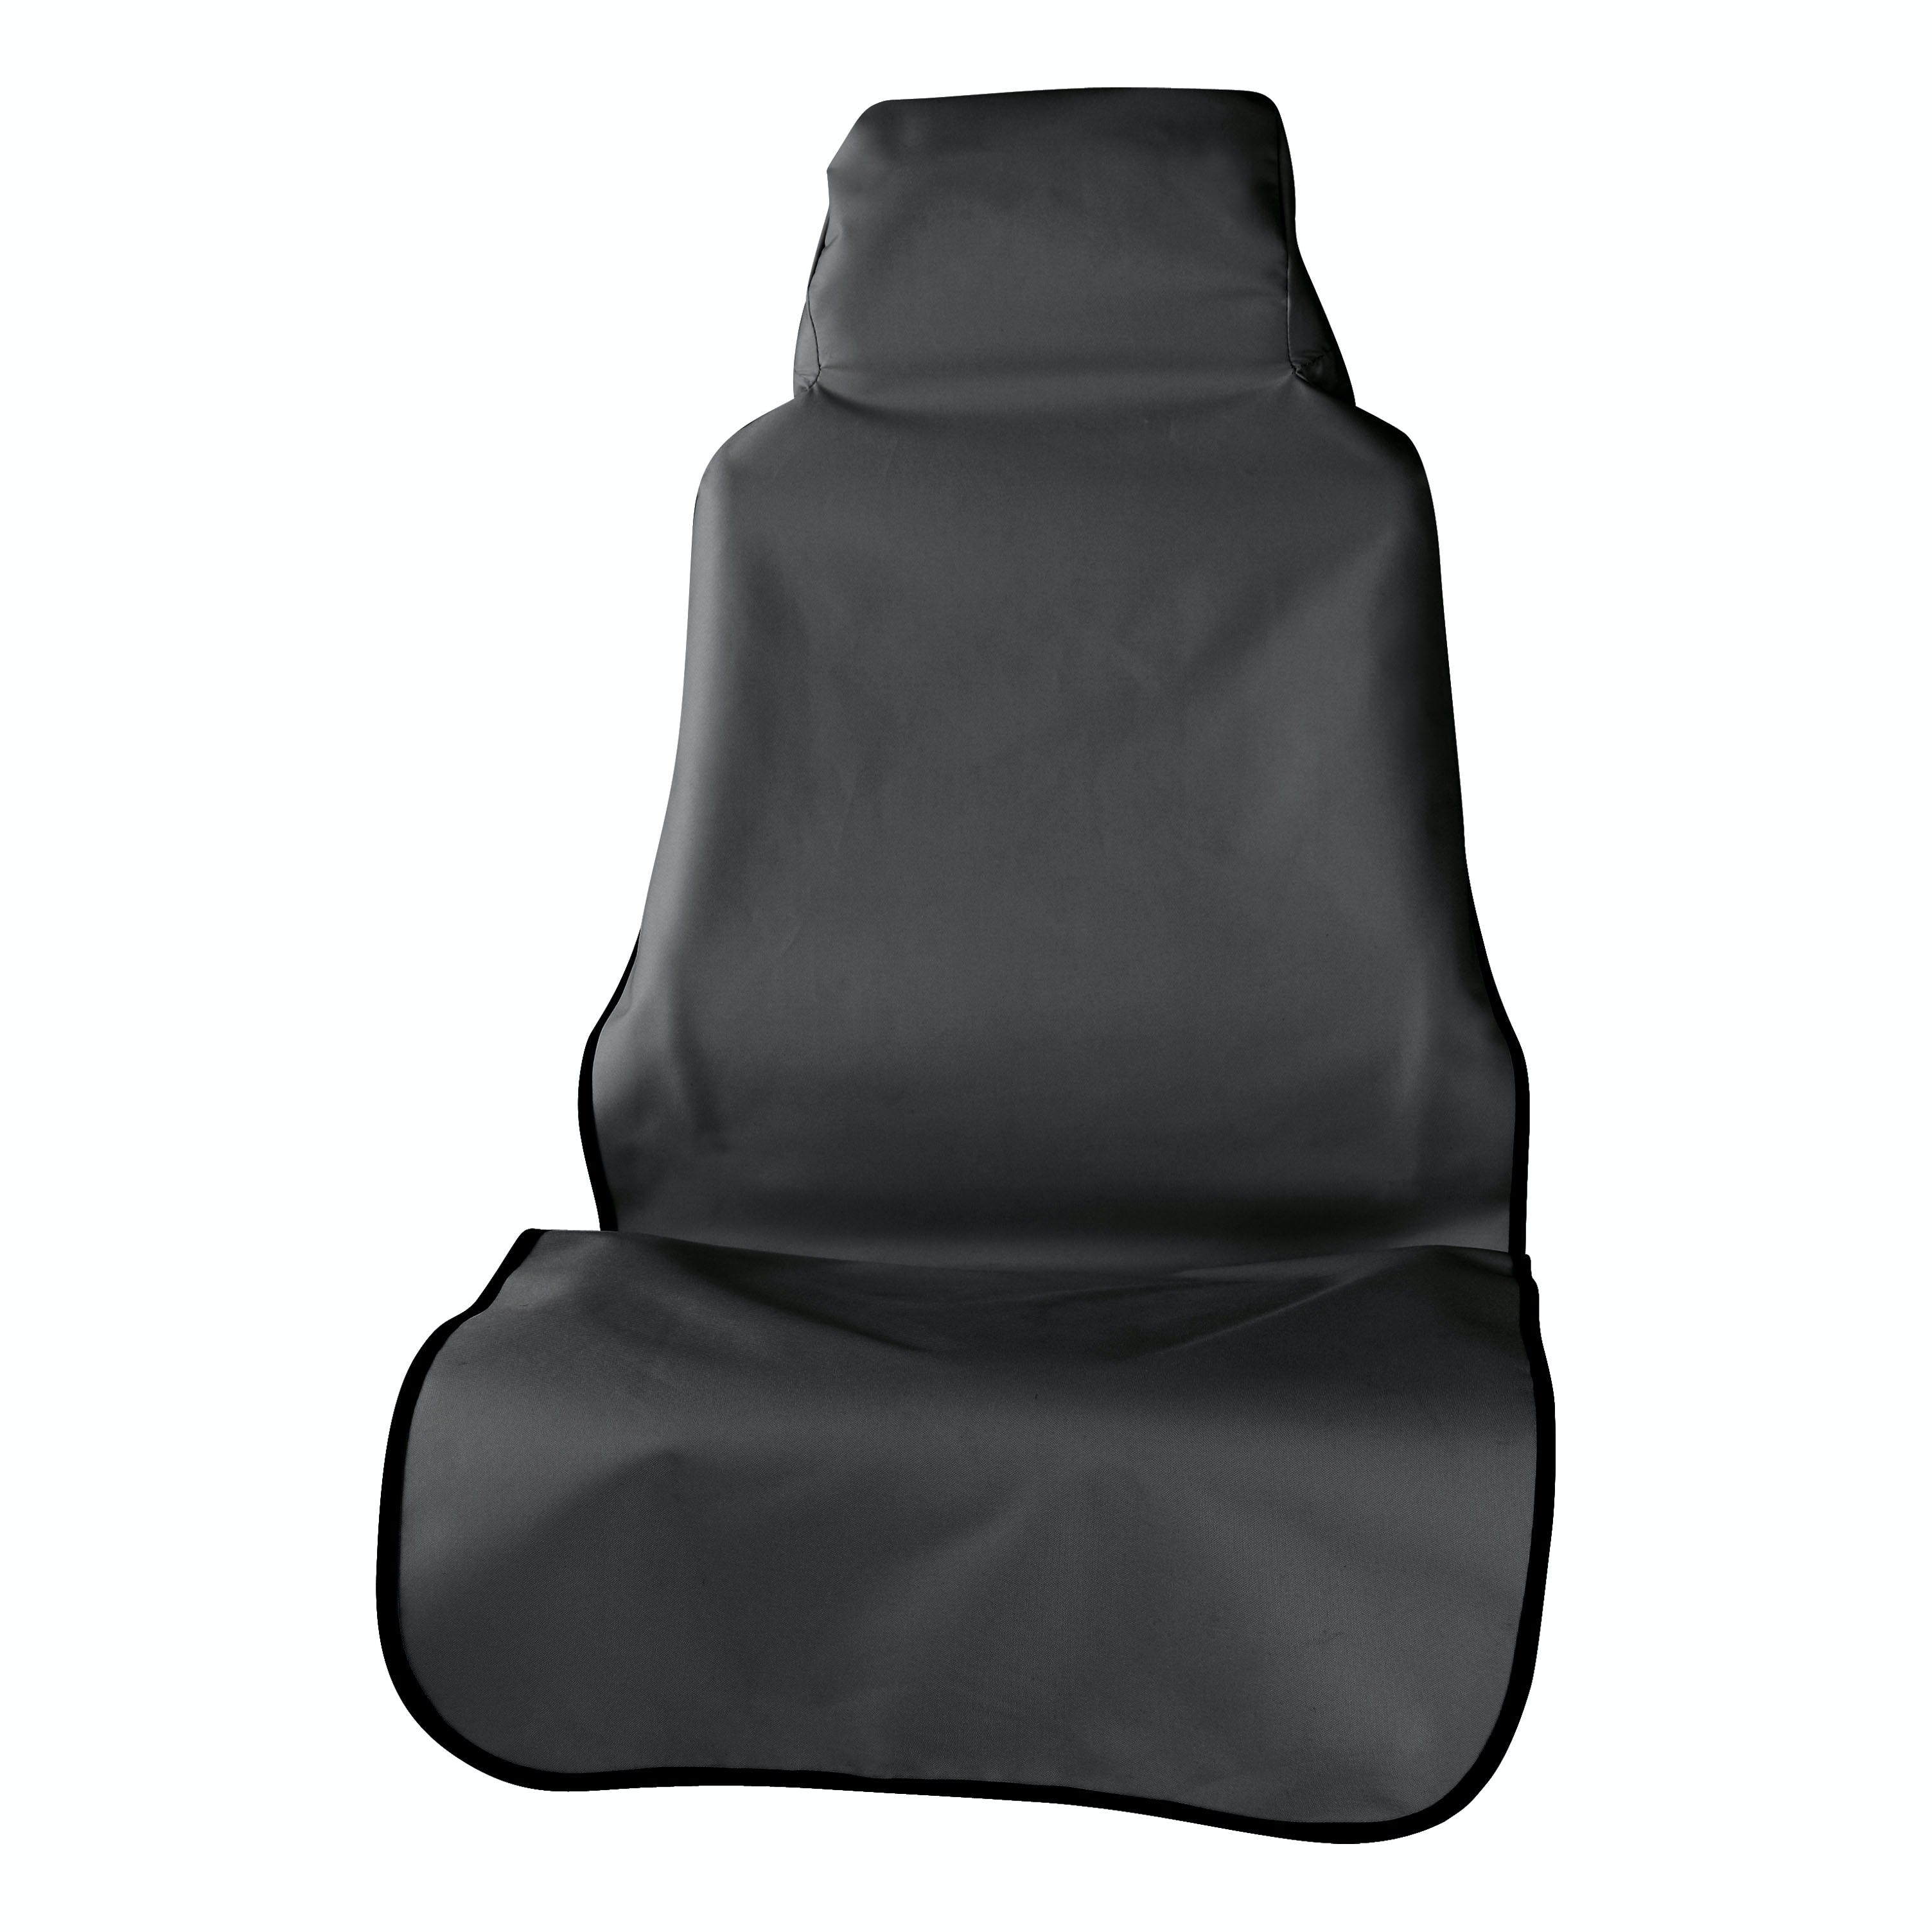 CURT 18501 Seat Defender 58 x 23 Removable Waterproof Black Bucket Seat Cover